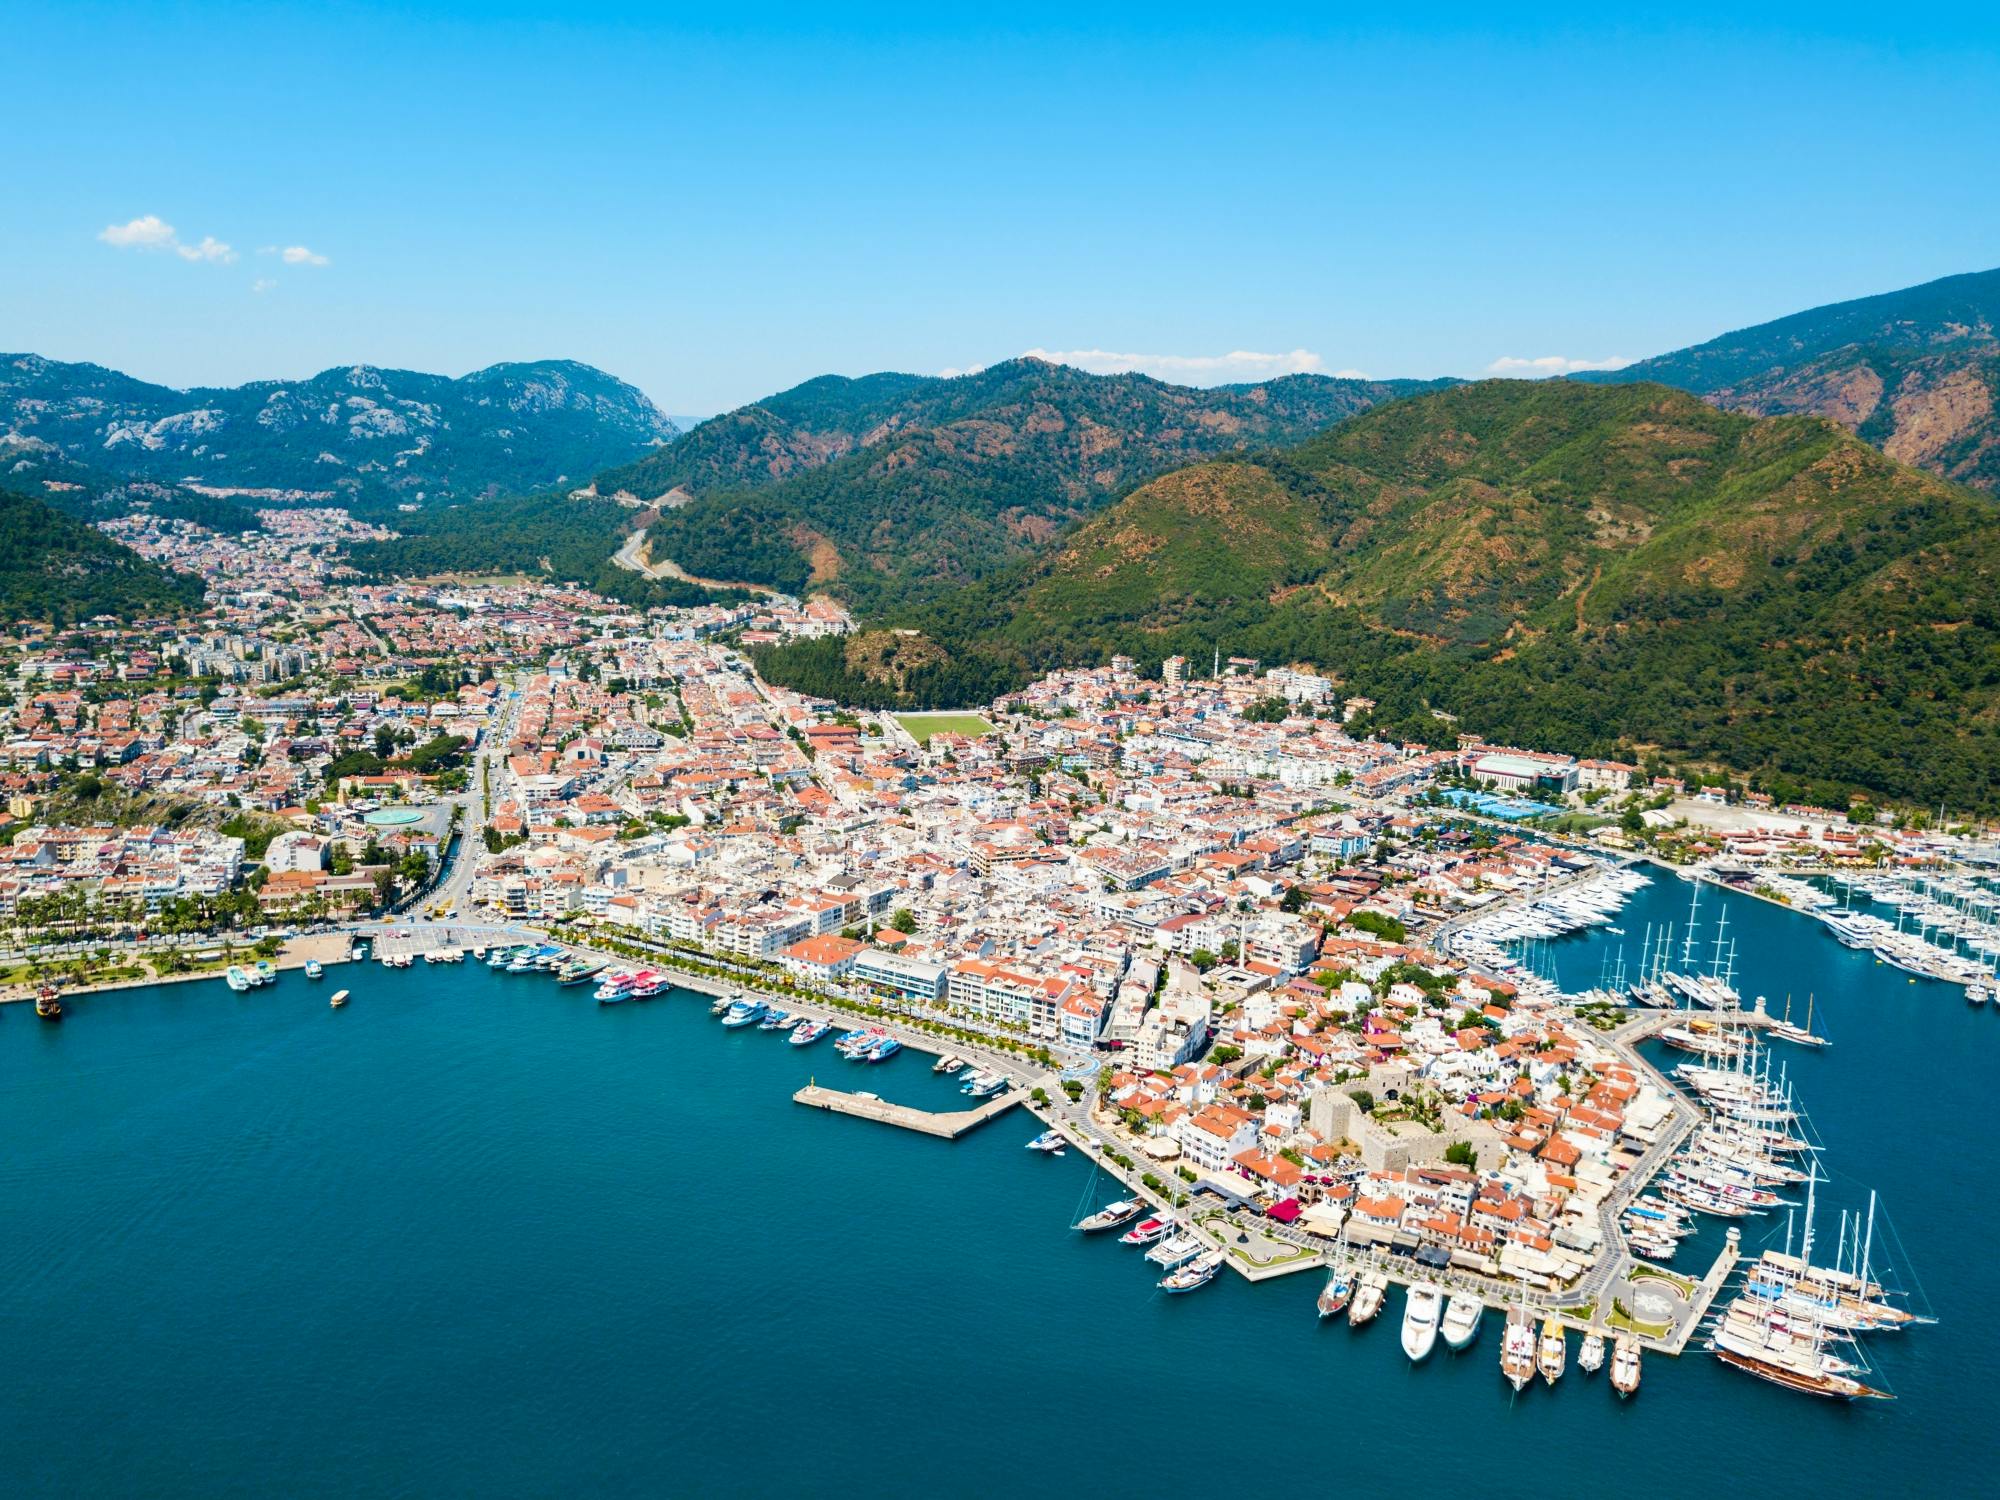 Marmaris day trip by boat from Rhodes